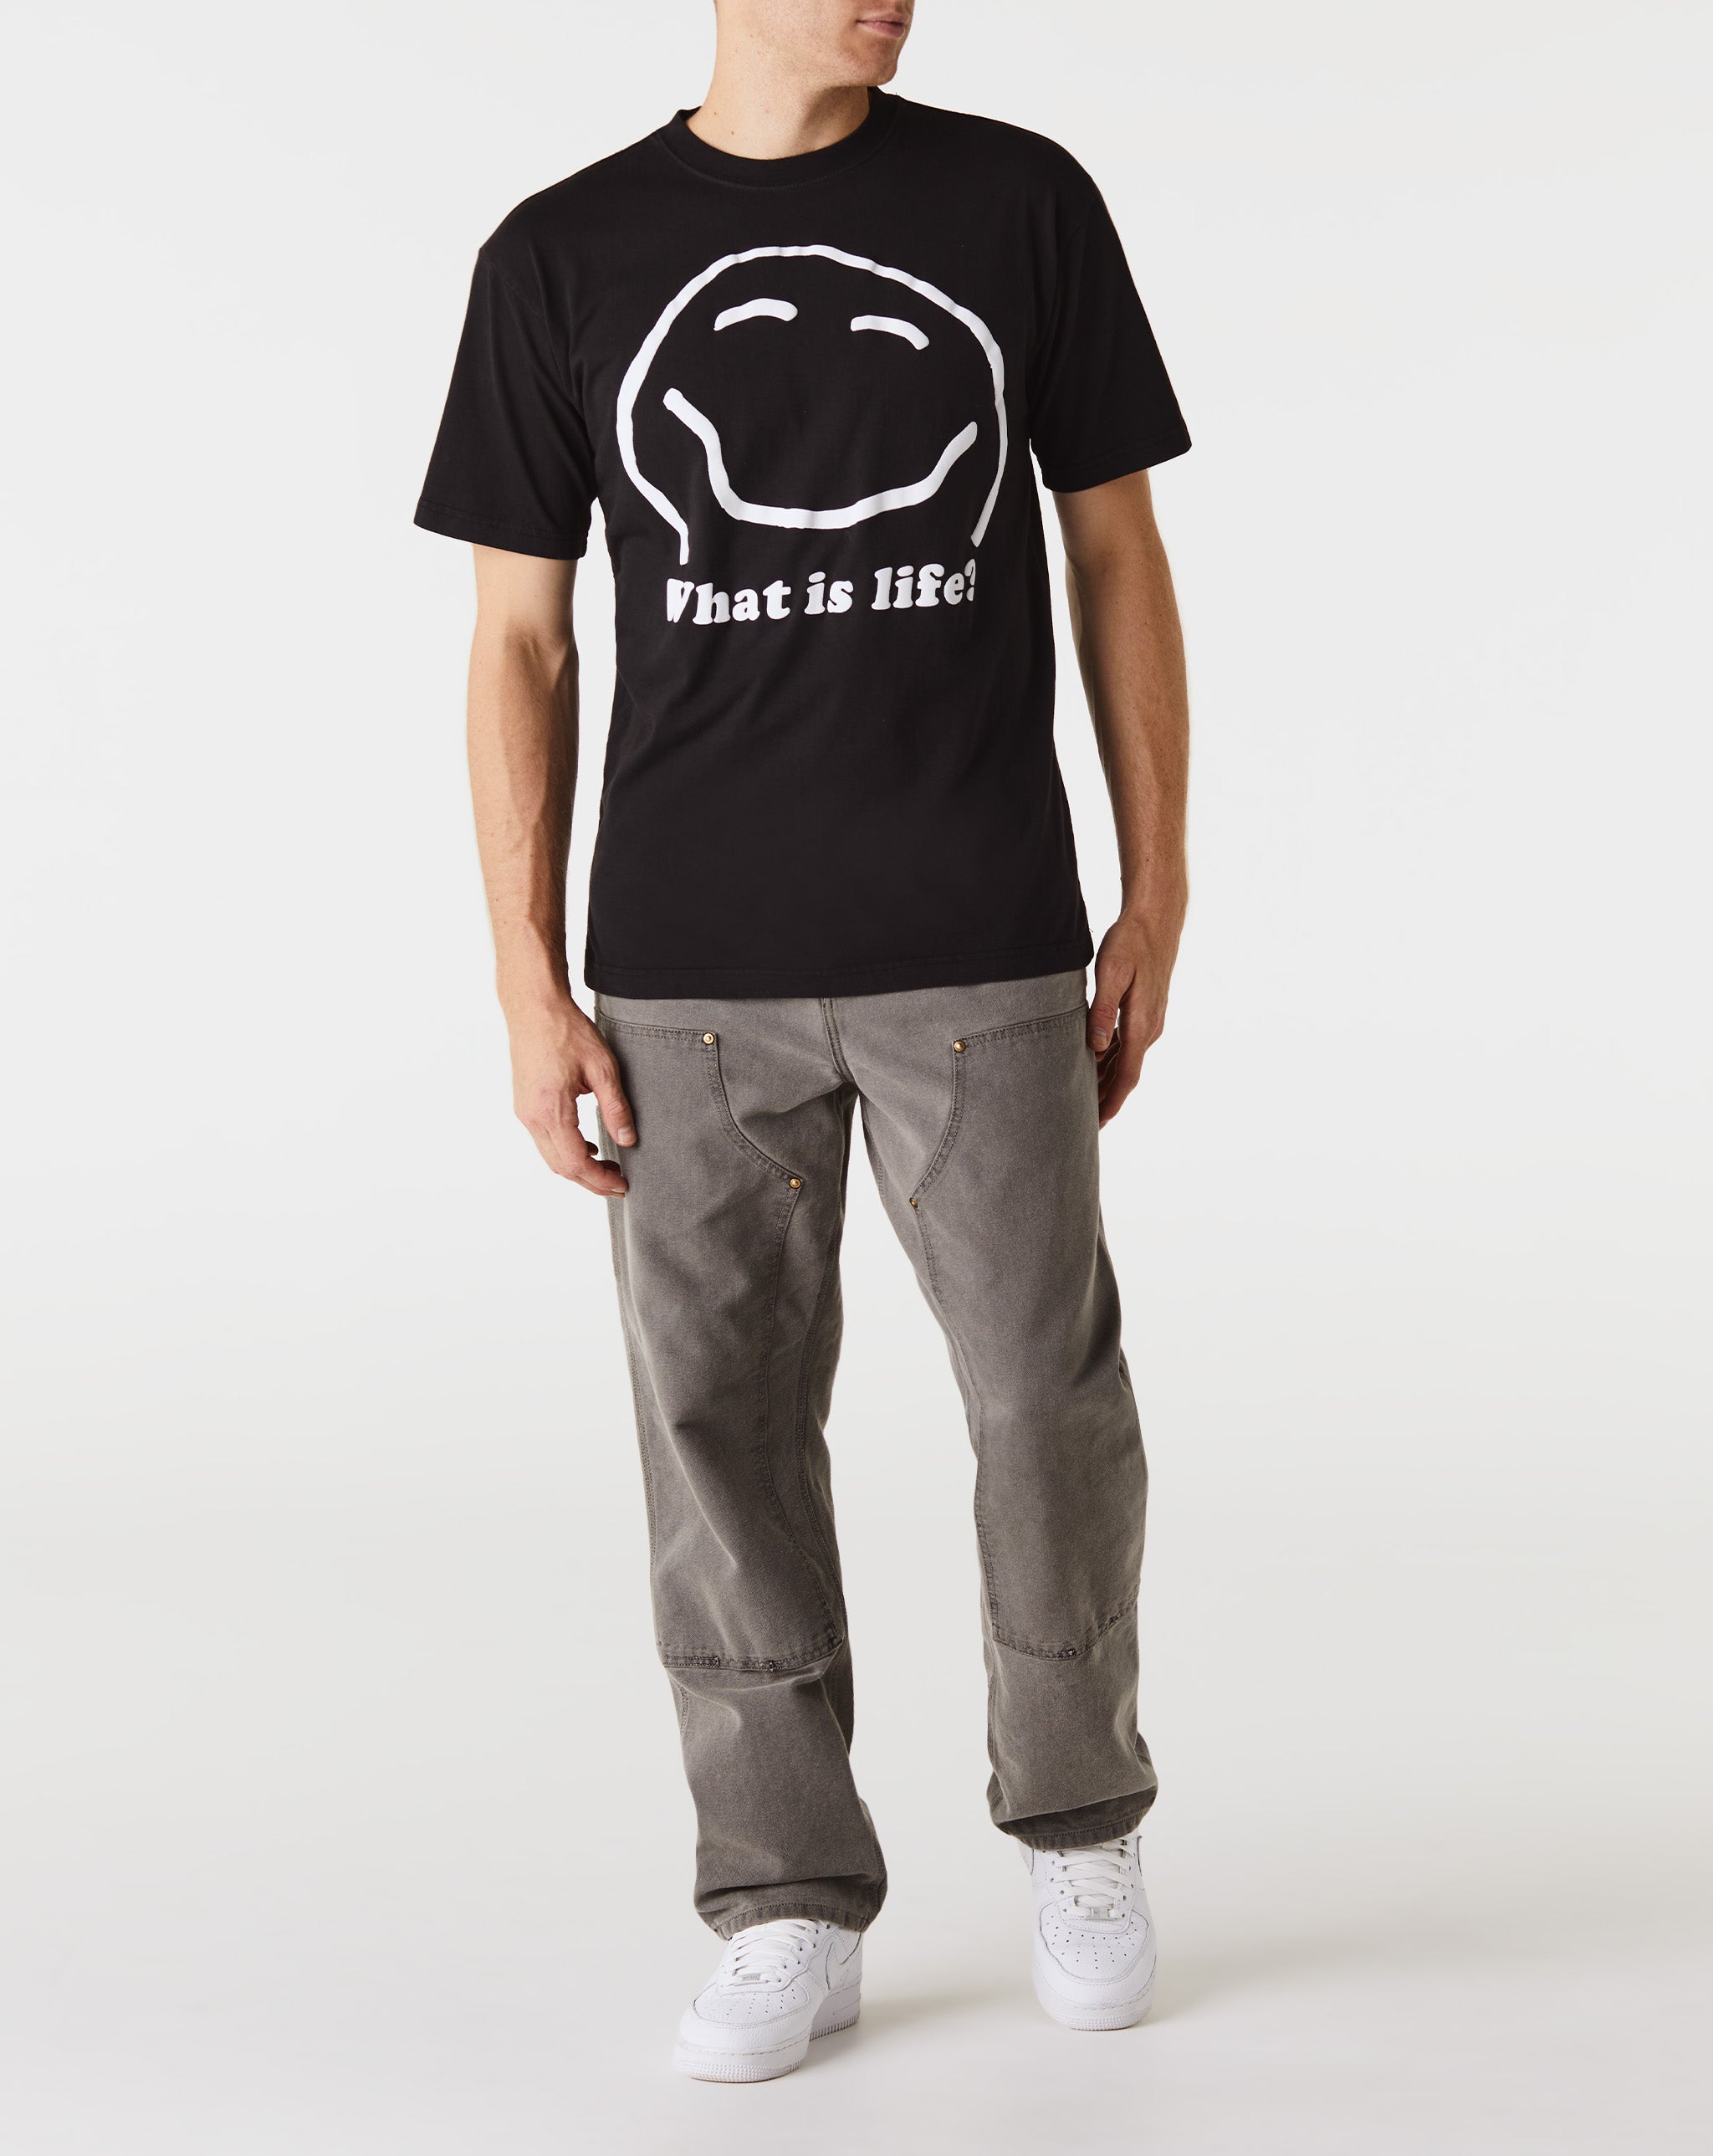 Market What Is Life T-Shirt - Rule of Next Apparel